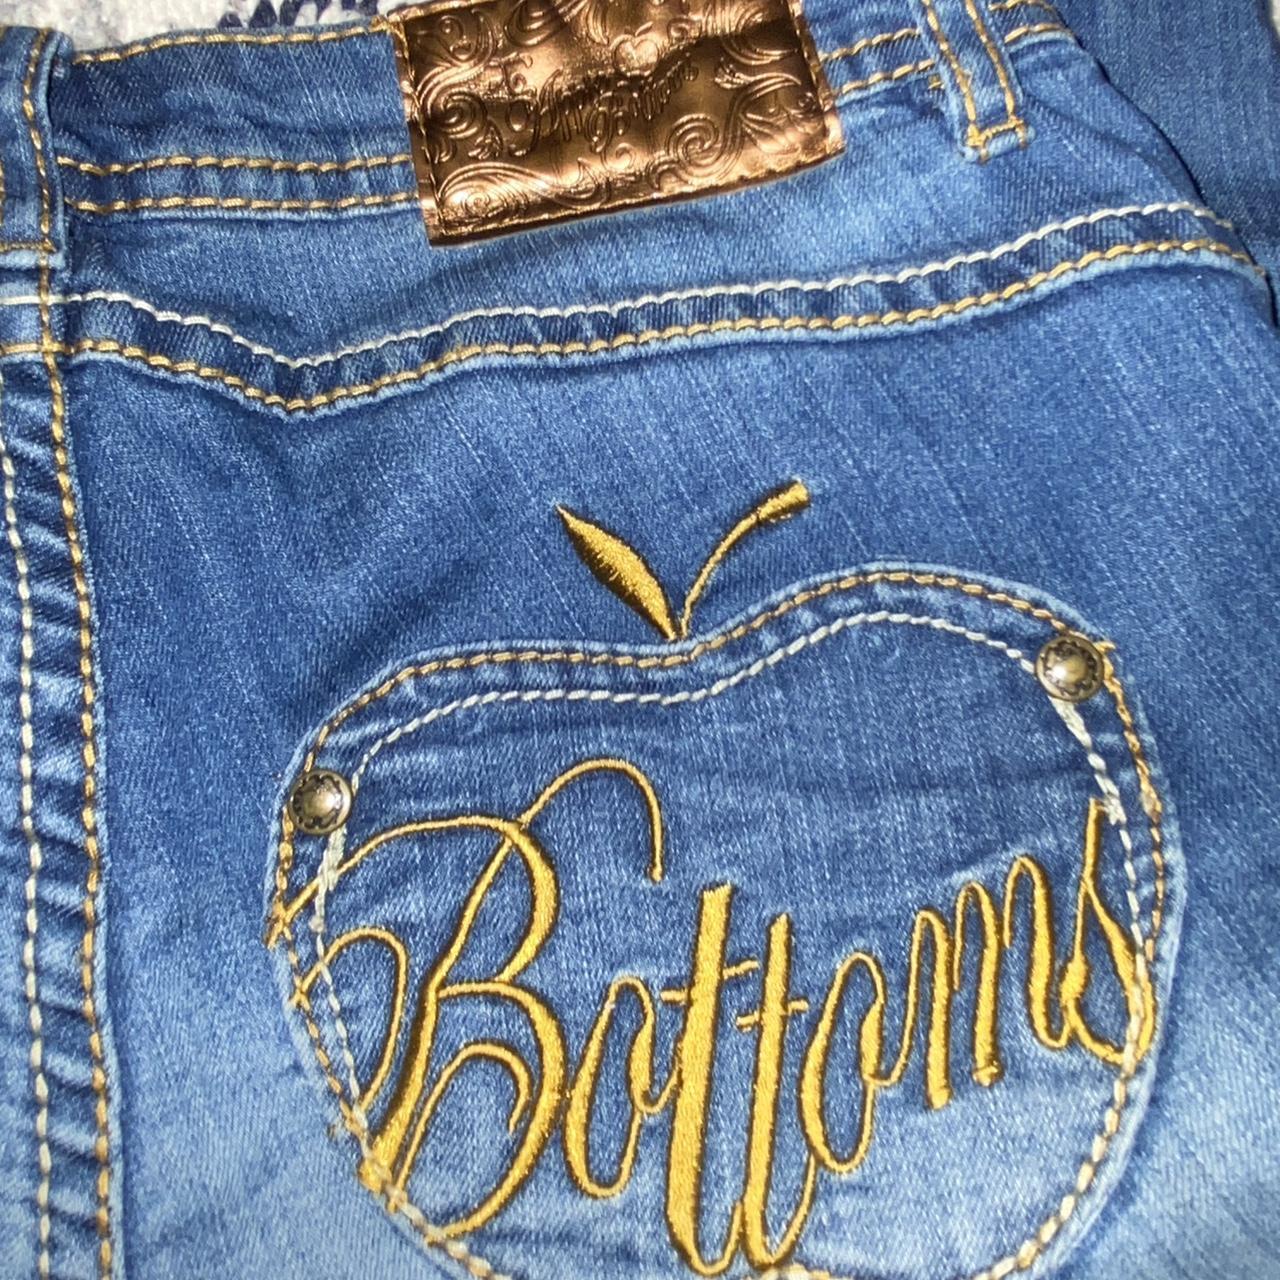 Apple Bottoms Women's Blue and Gold Jeans